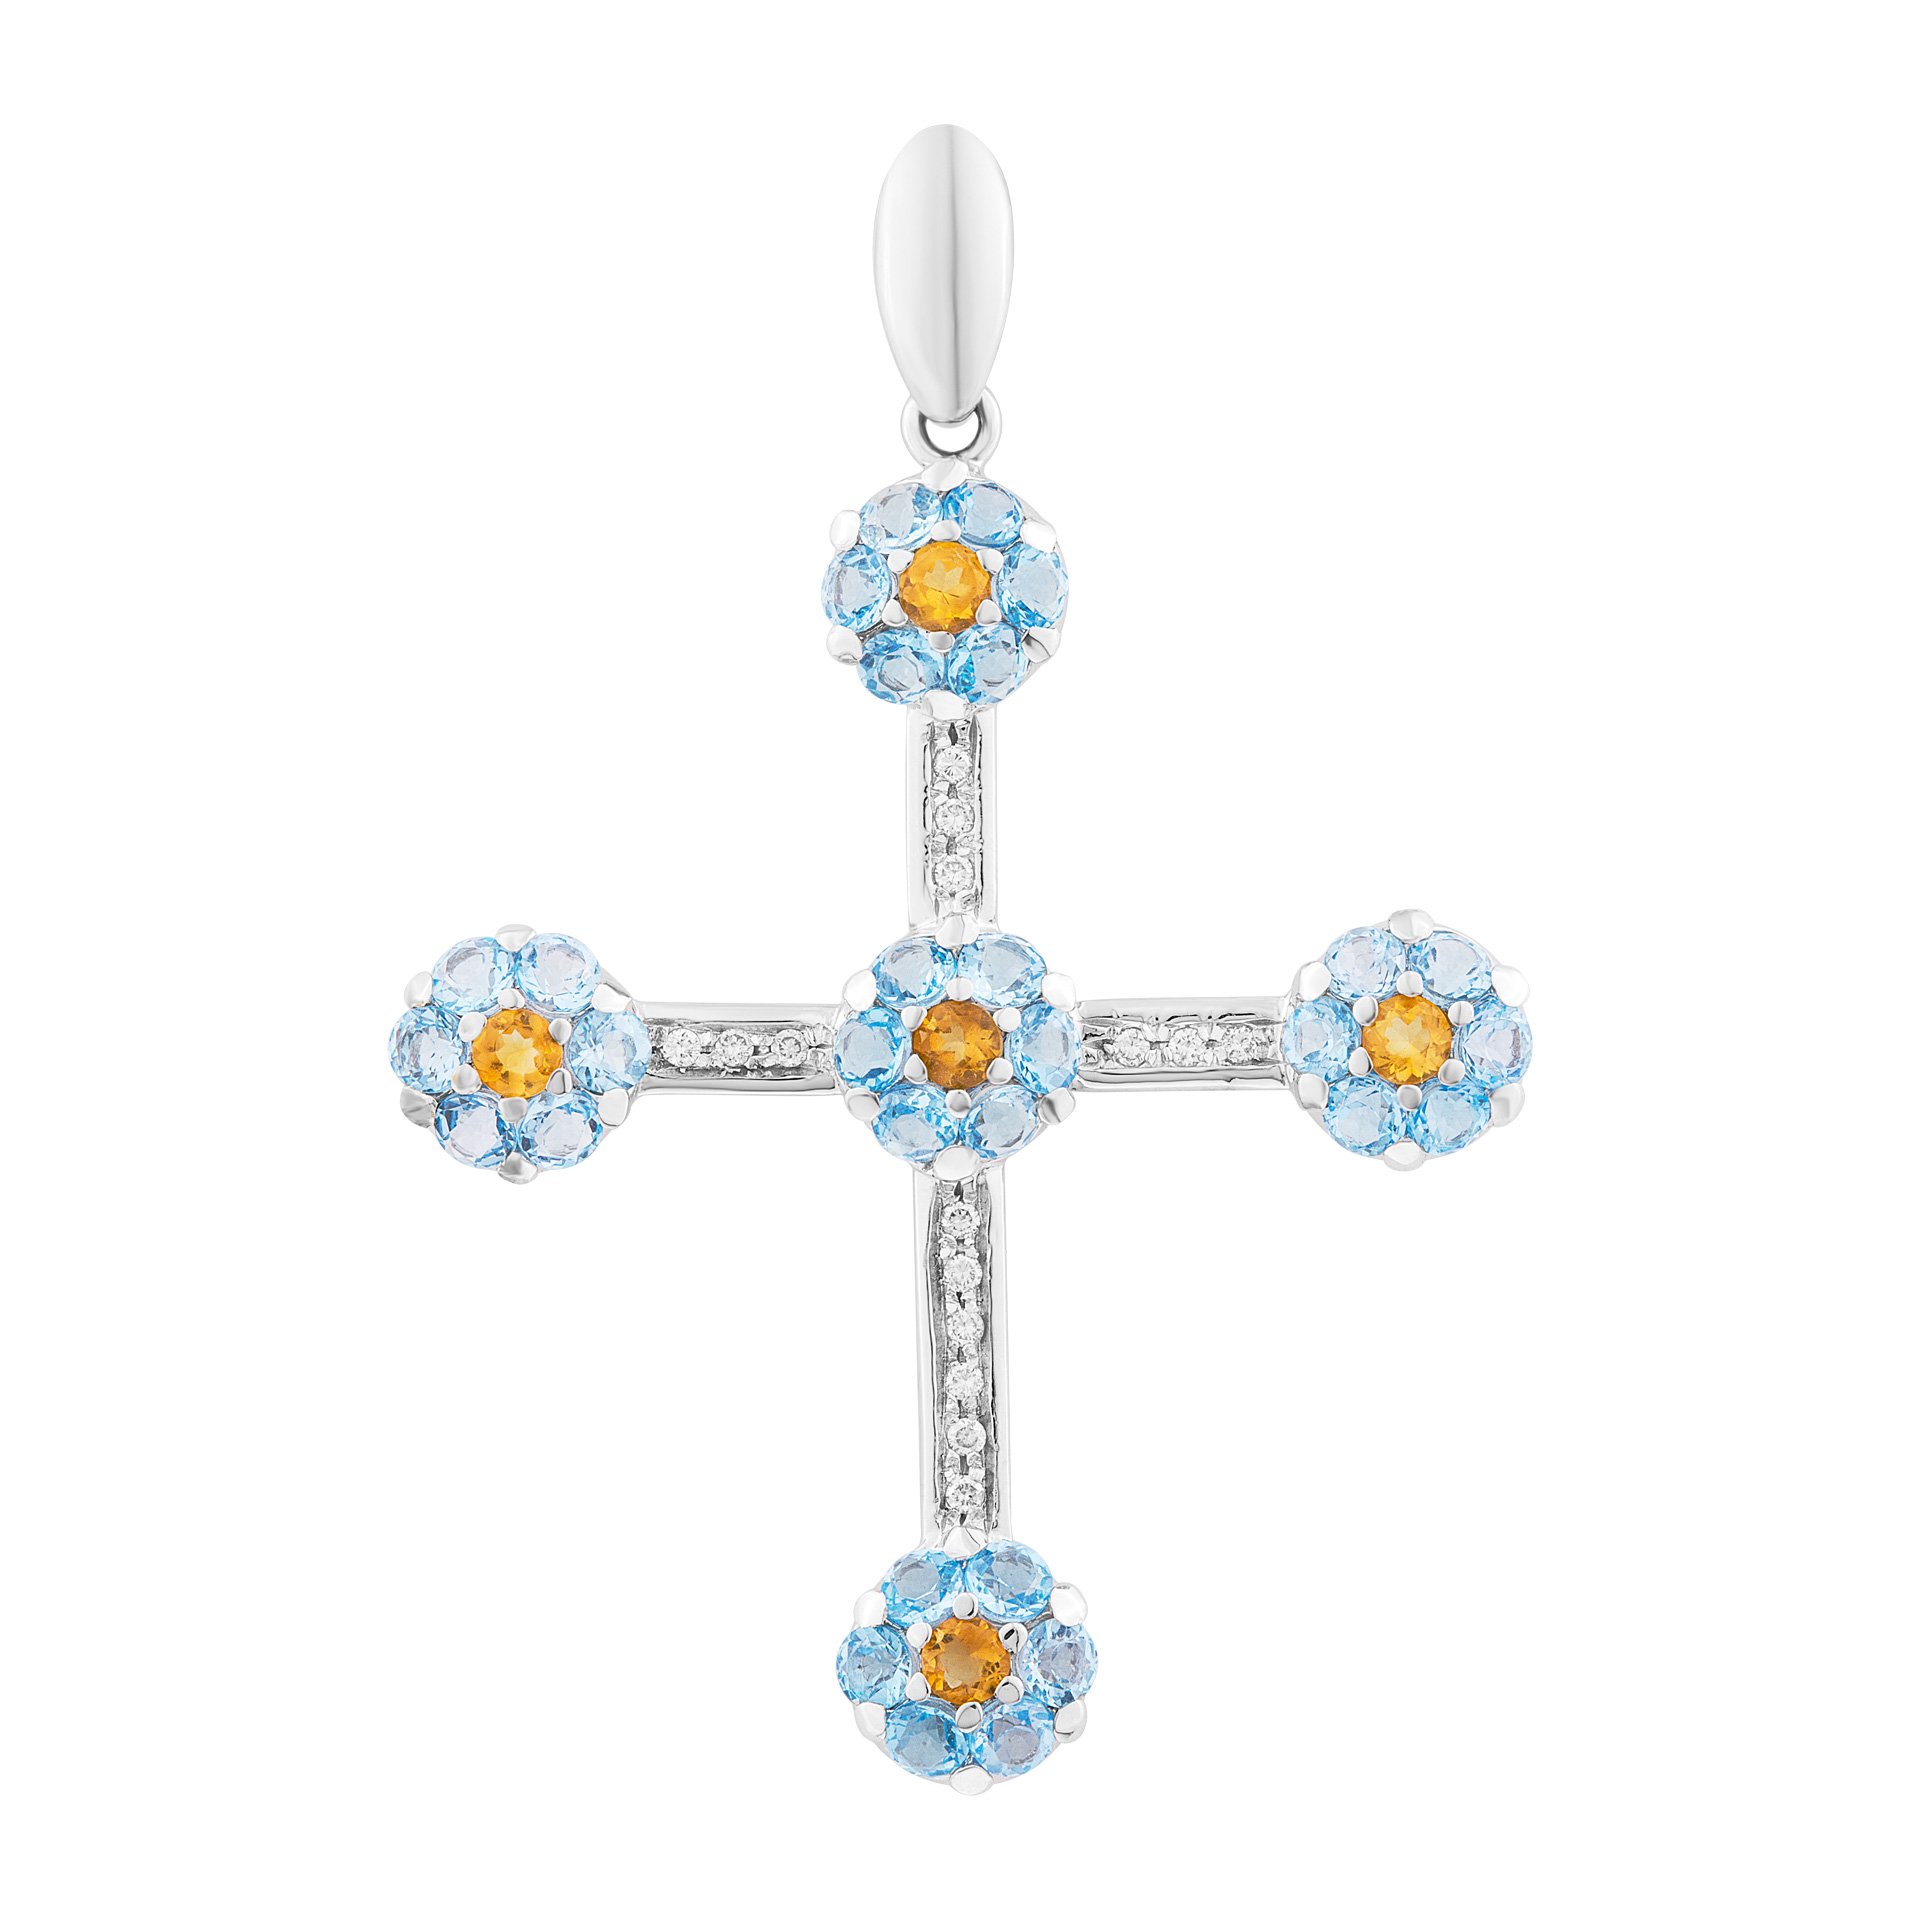 Diamond cross pendant in 18k white gold with topaz flower accents